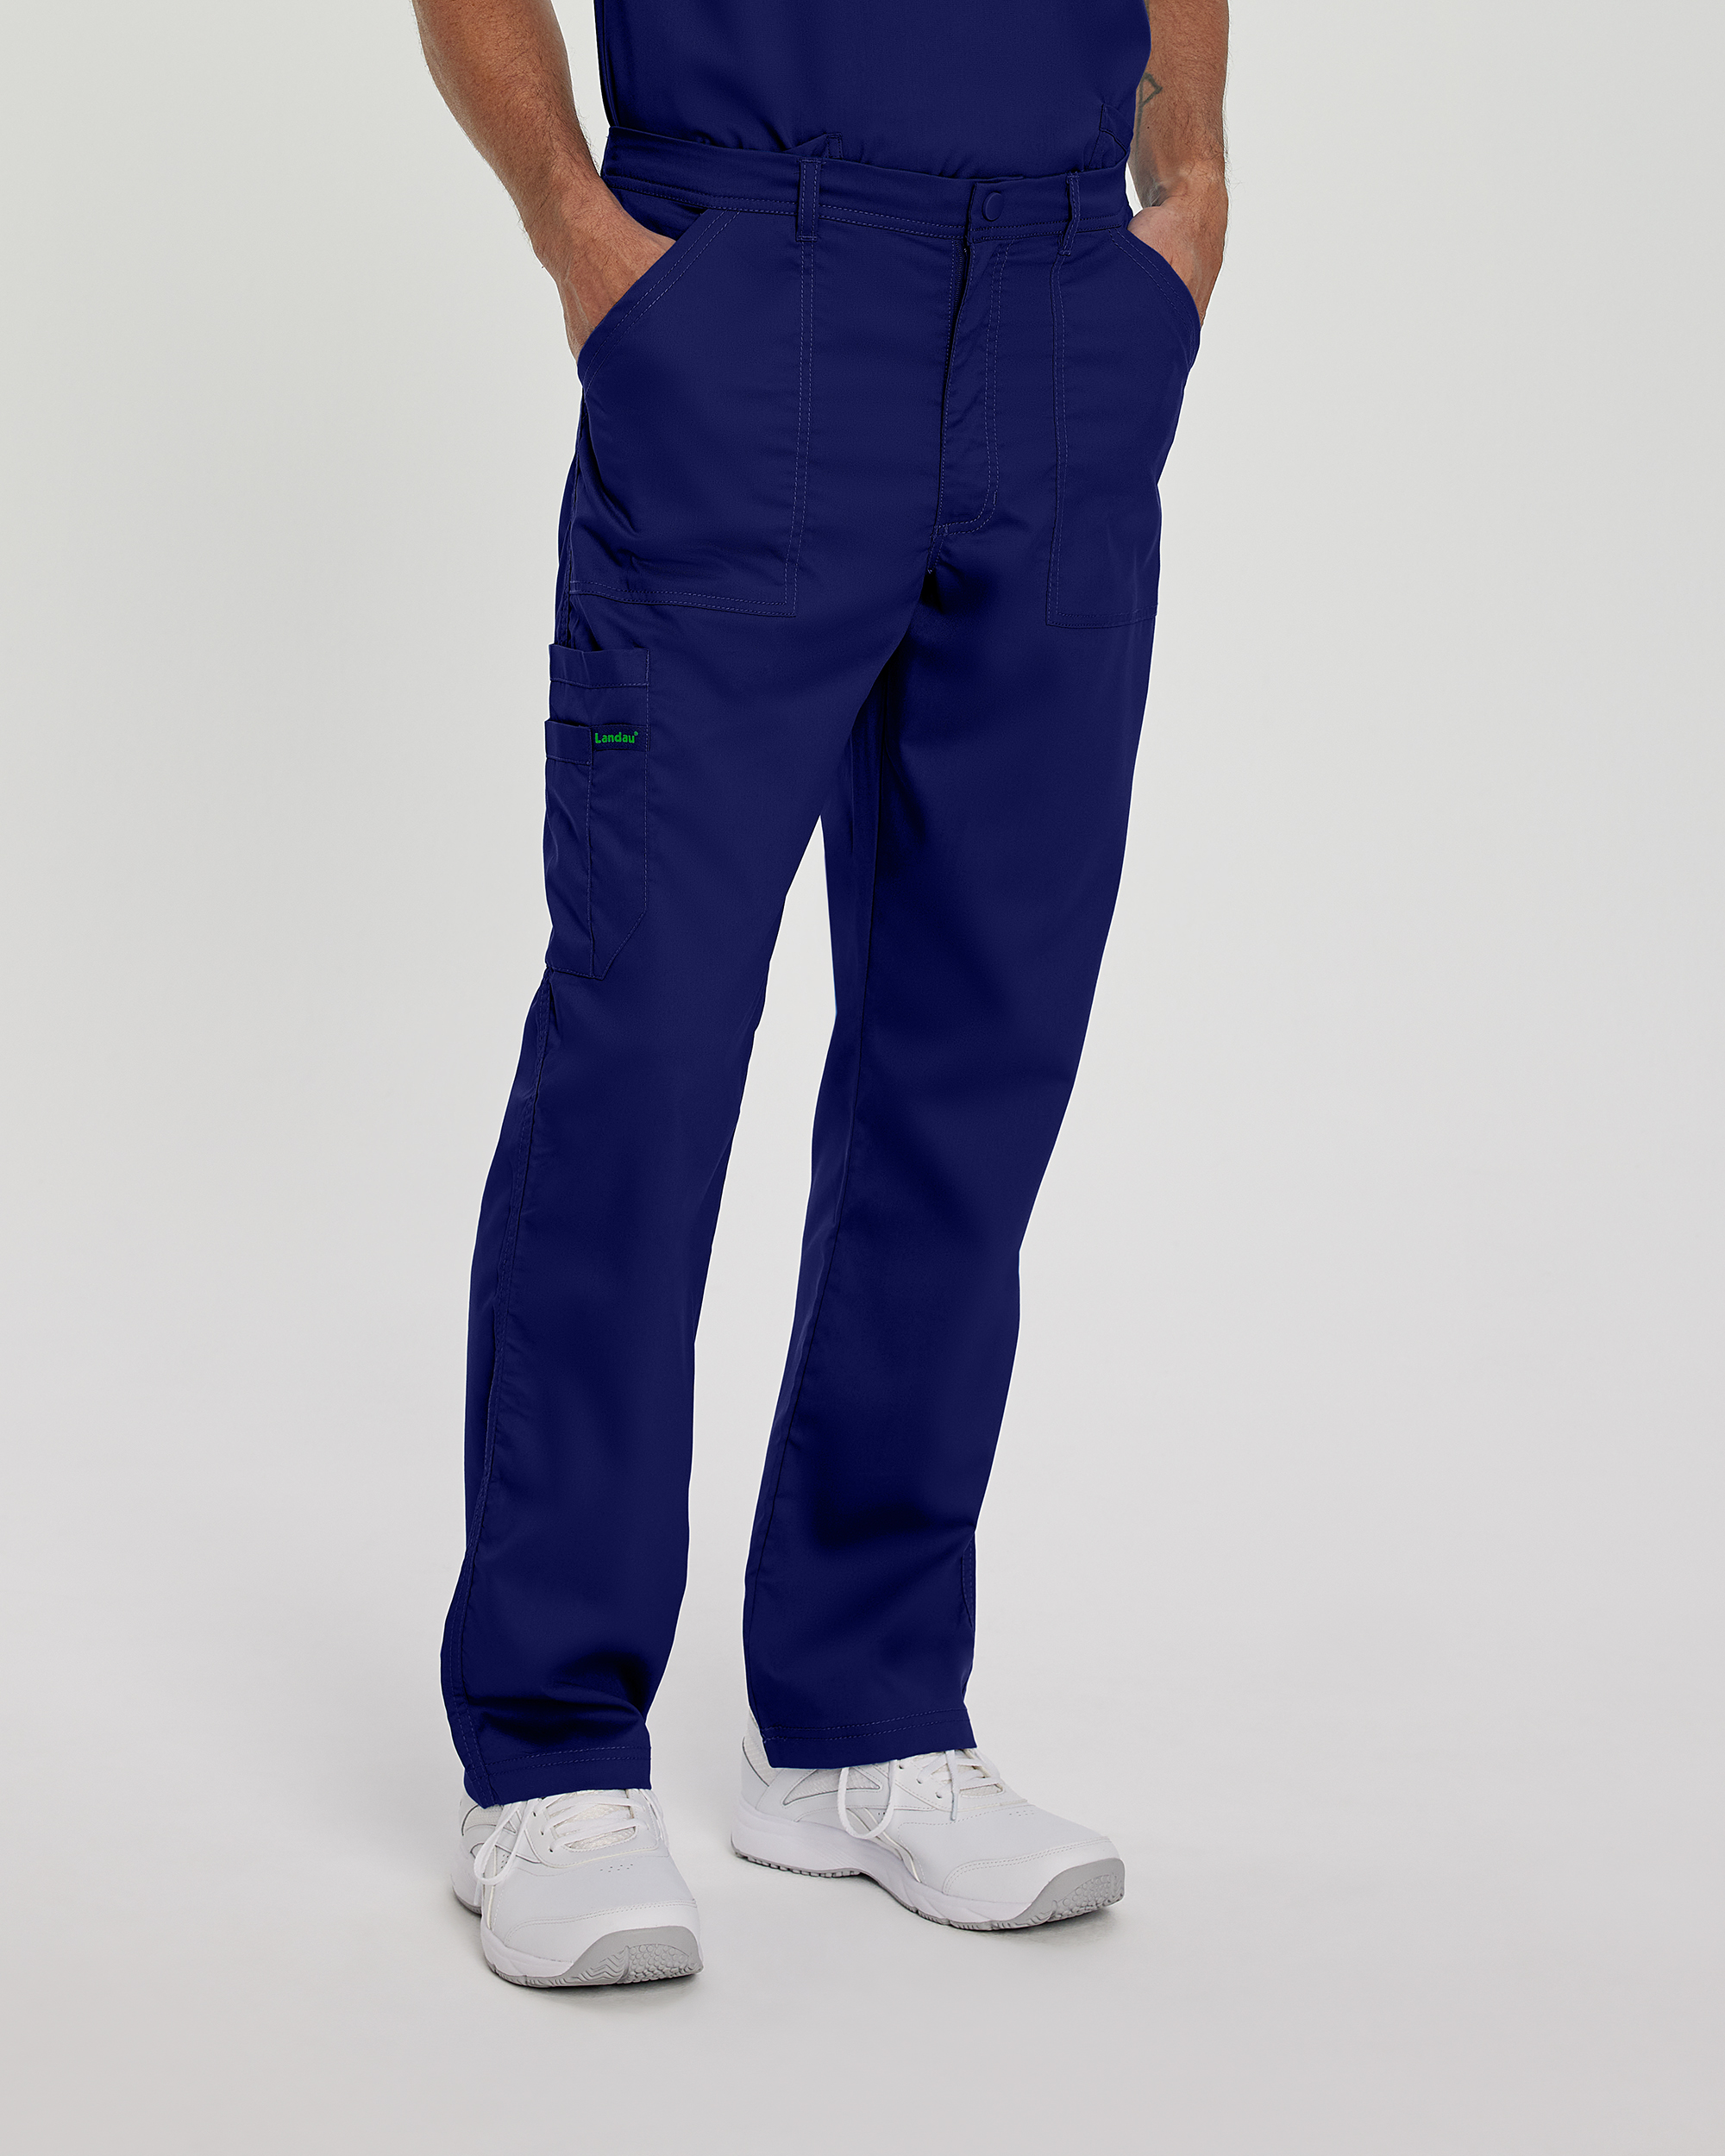 Are these scrub pants suitable for professional healthcare settings?